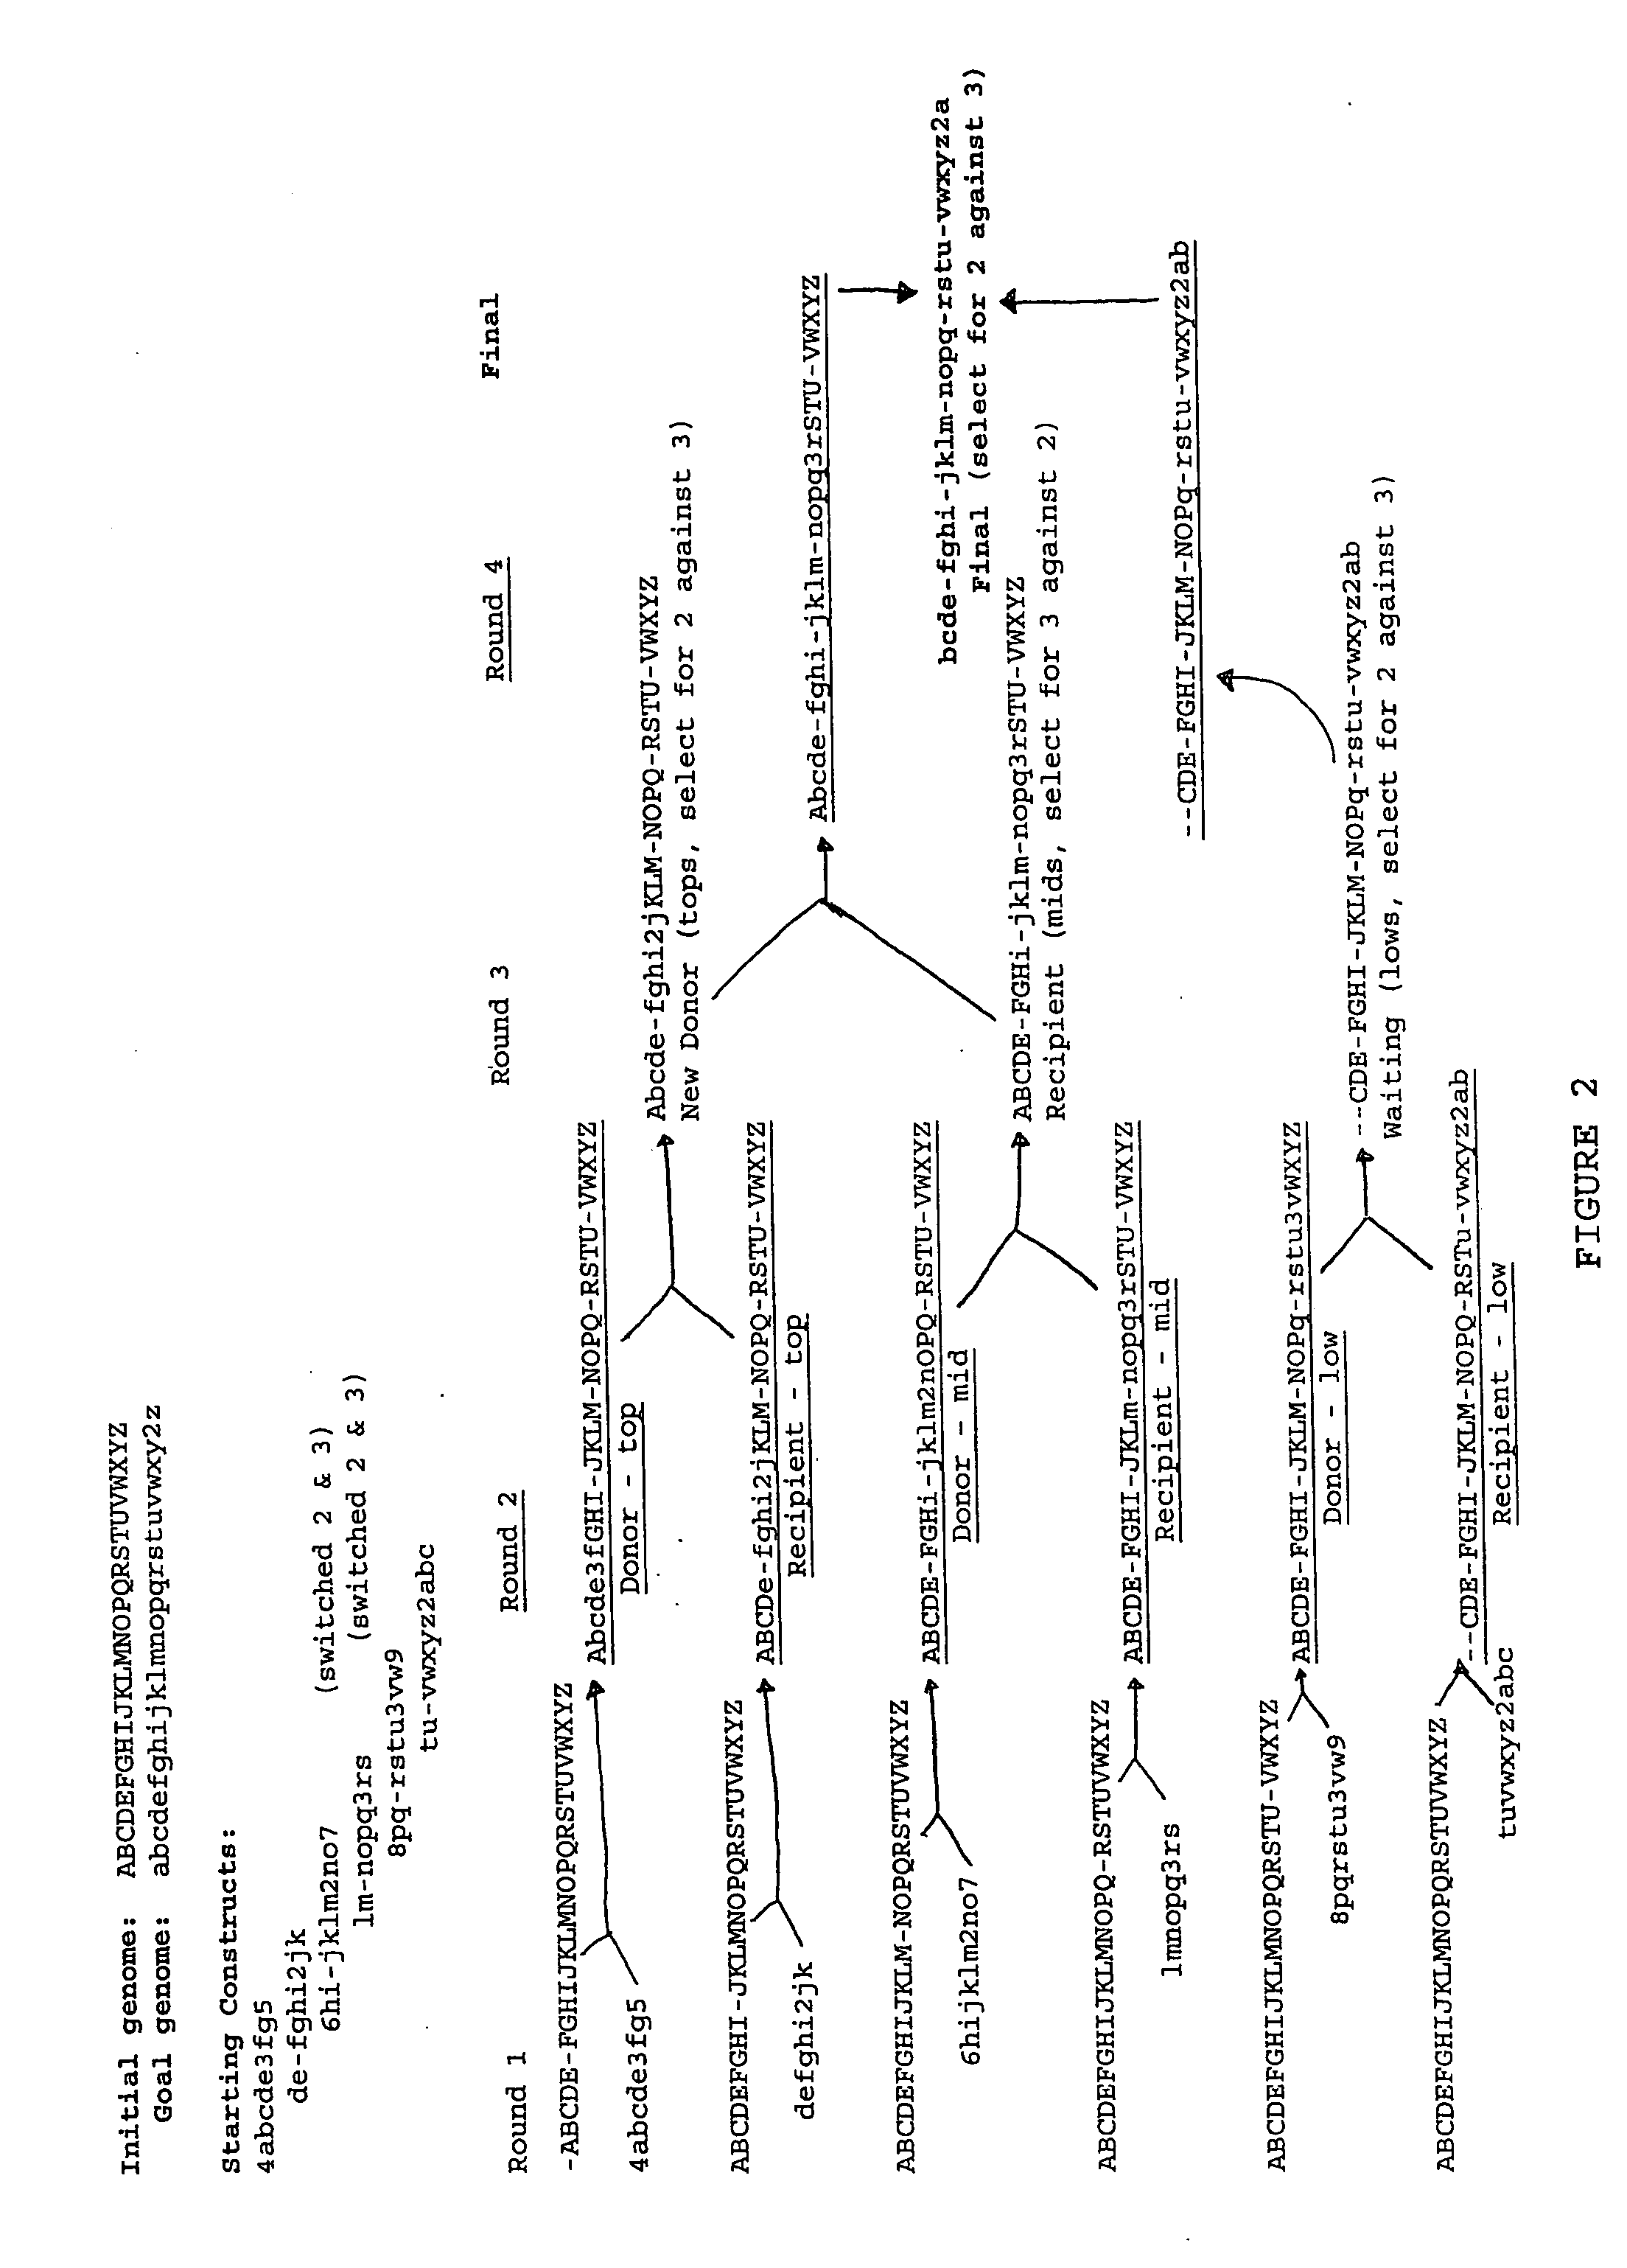 Heirarchical assembly methods for genome engineering